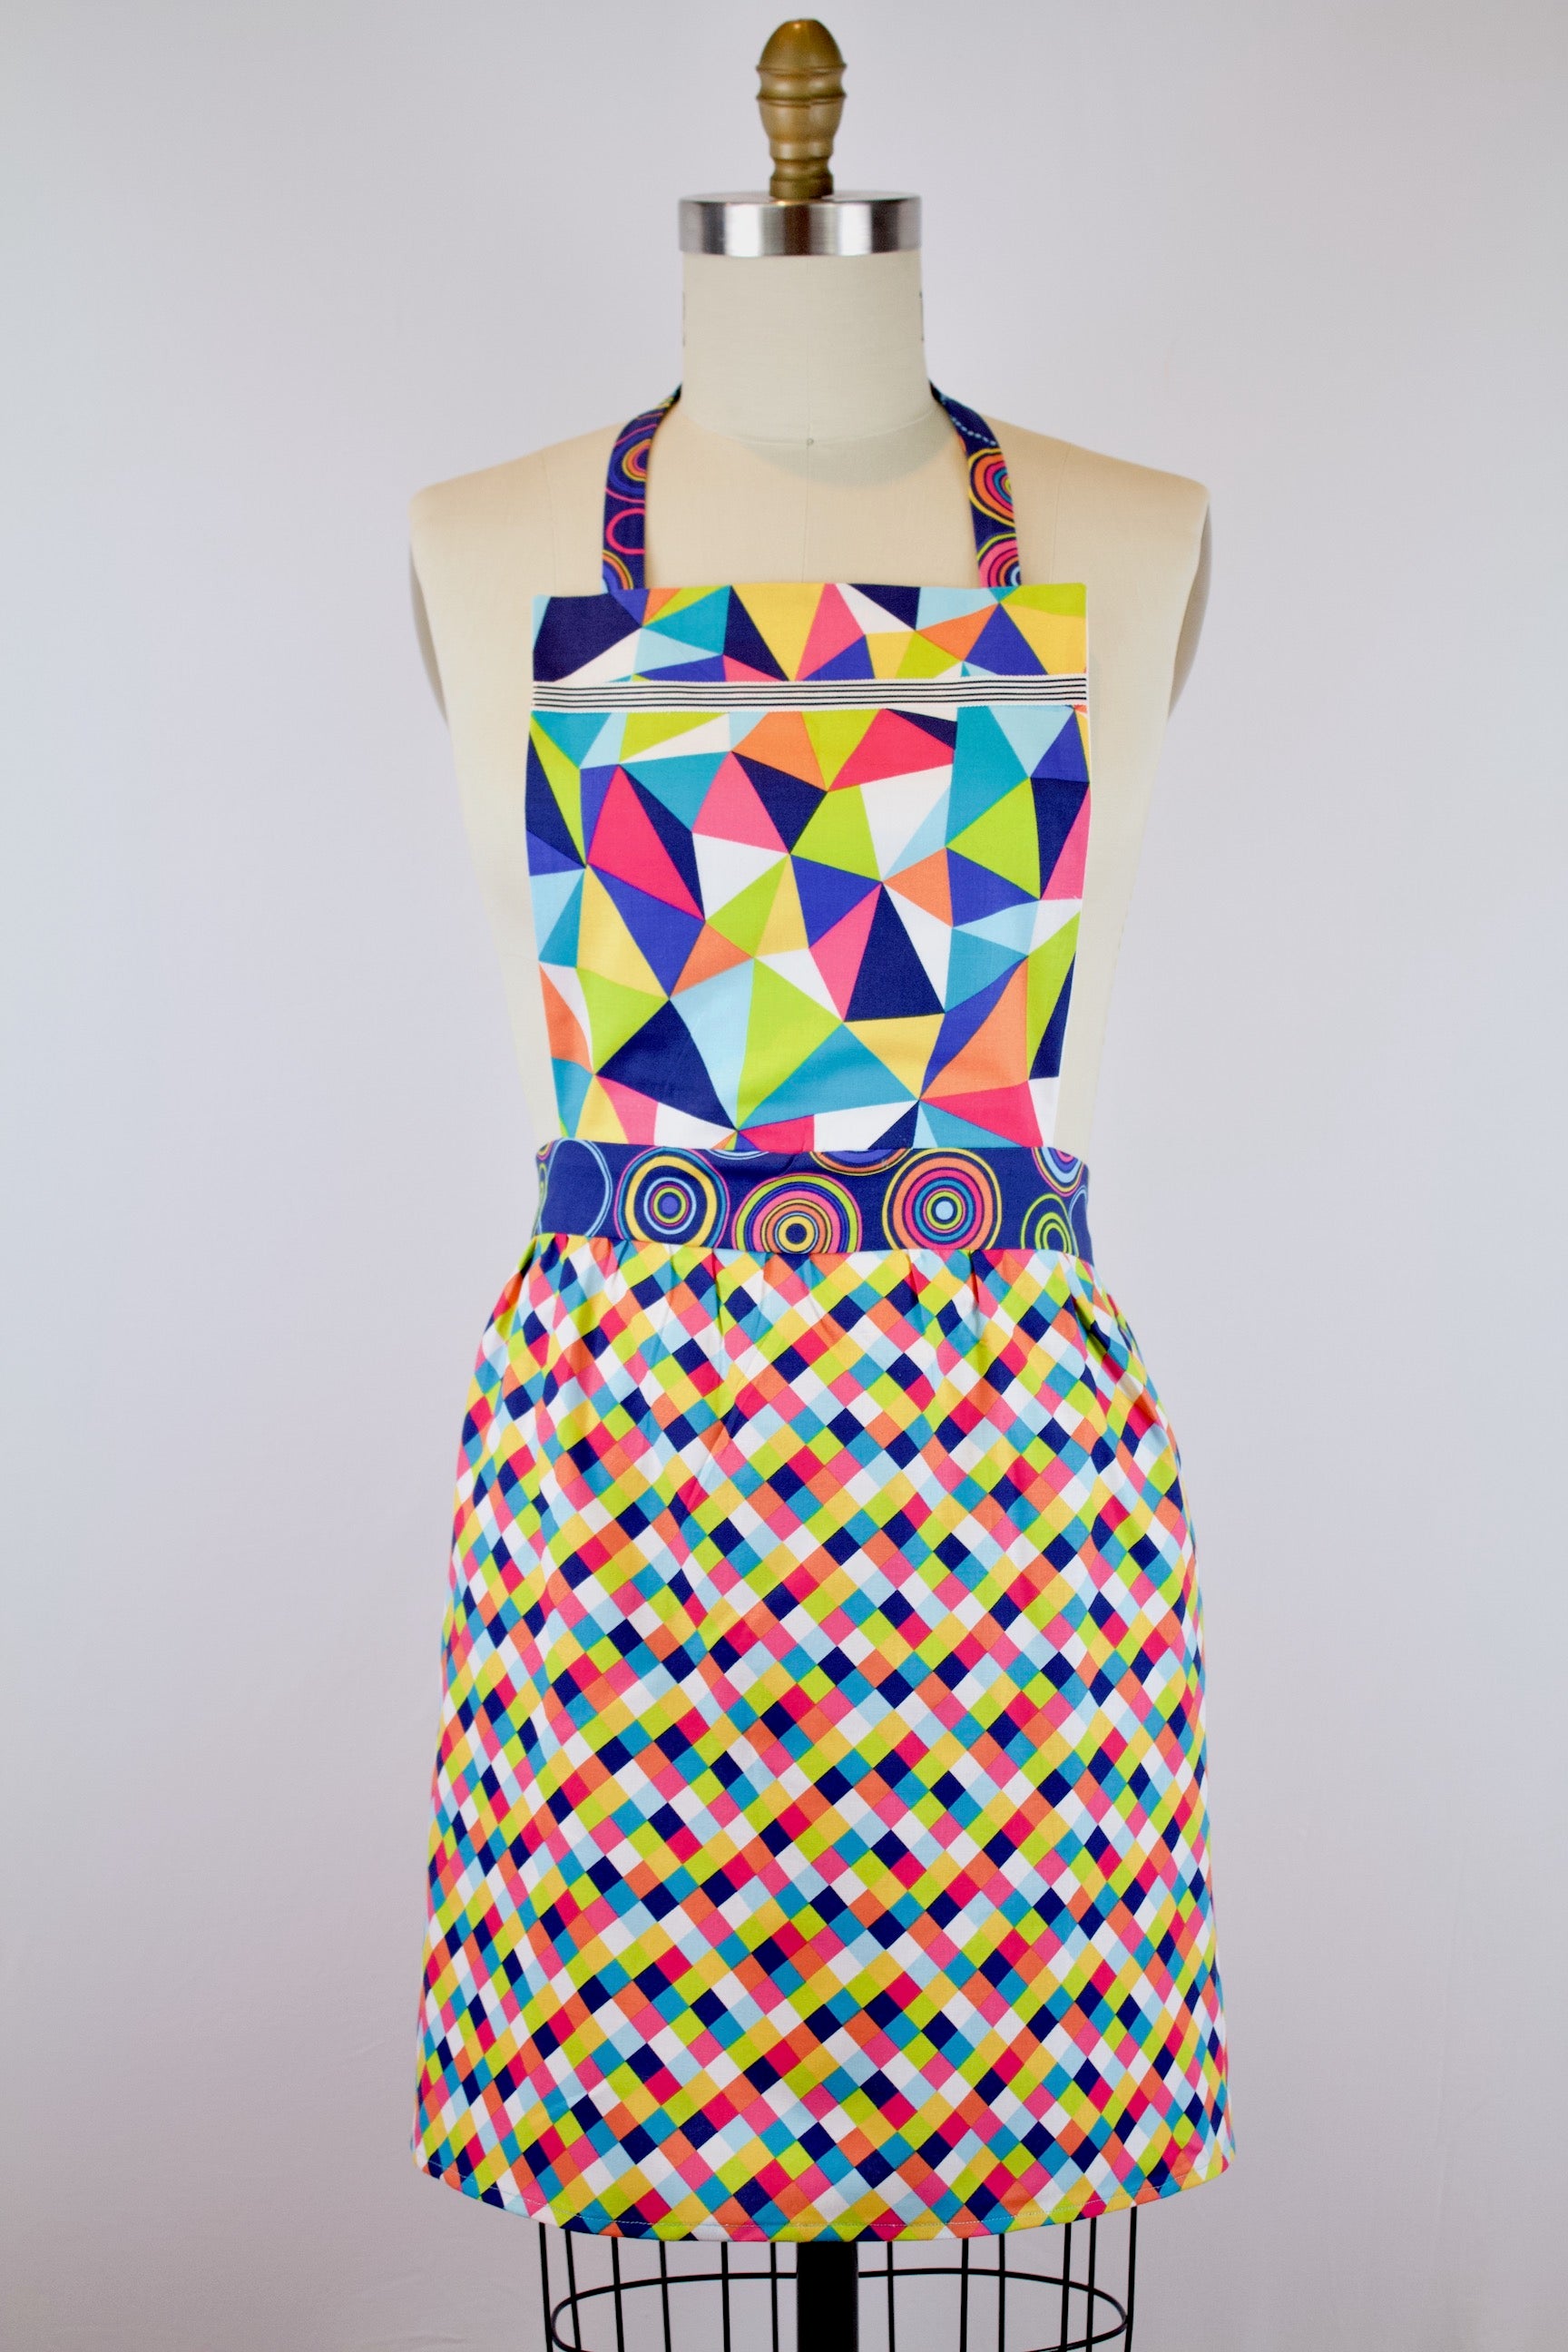 Kaleidoscope Vintage Style Apron-The Blue Peony-Age Group_Adult,Apron Style_Vintage Feminine,Category_Apron,Color_Aqua,Color_Blue,Color_Lime Green,Color_Pink,Color_Teal,Department_Kitchen,Material_Cotton,Pattern_Graphic